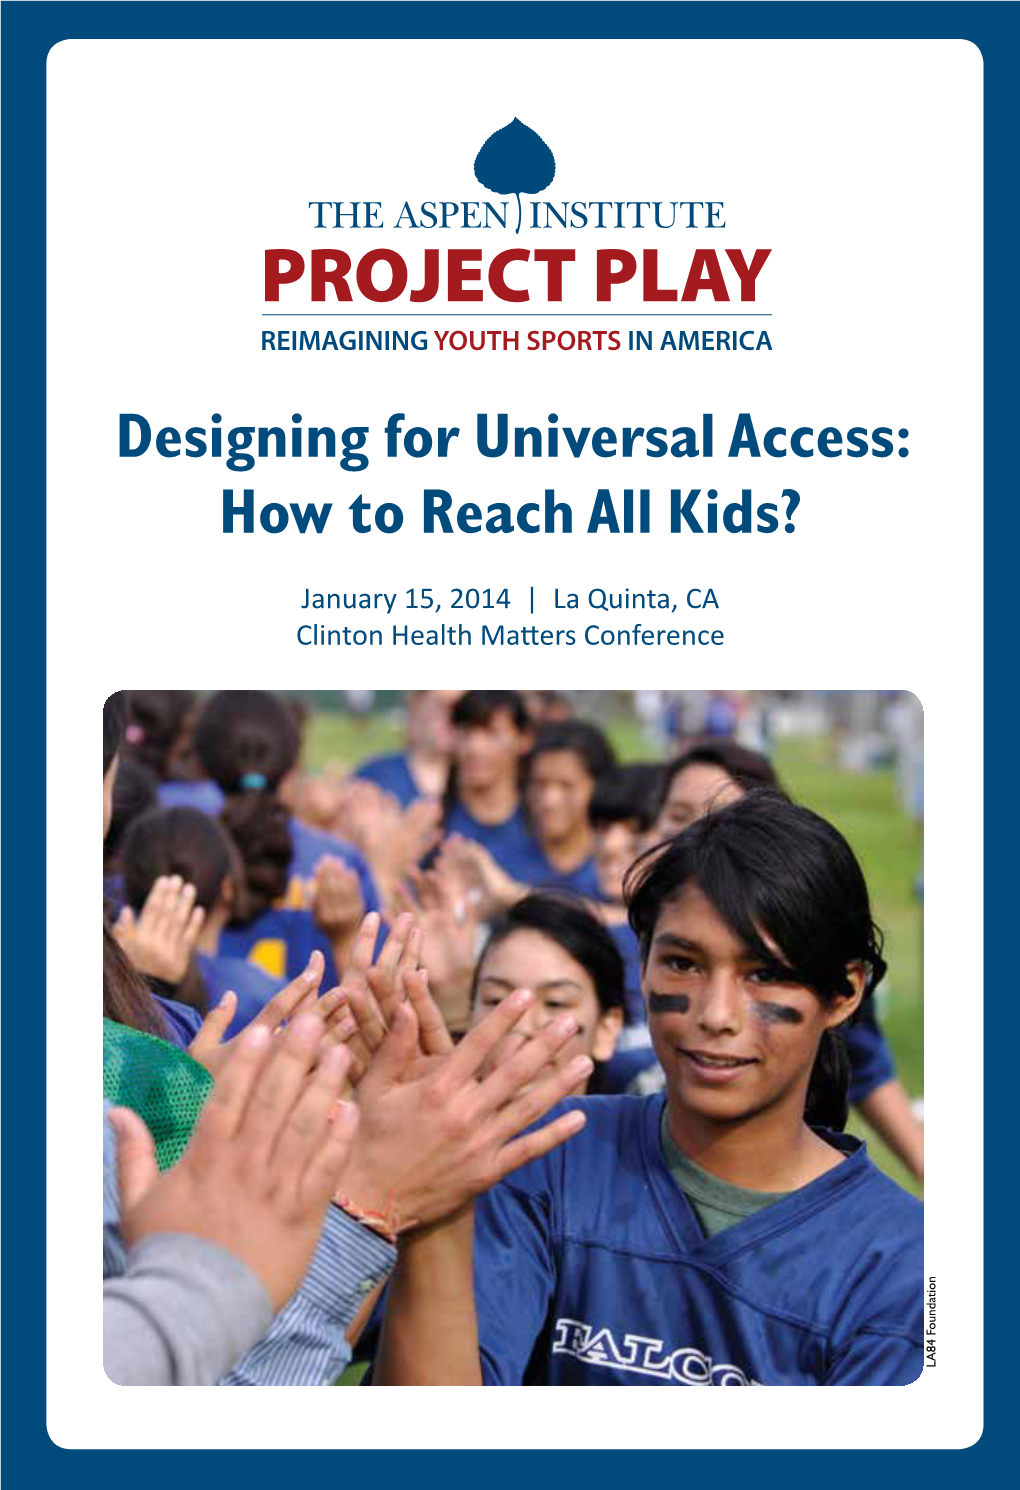 Designing for Universal Access: How to Reach All Kids?